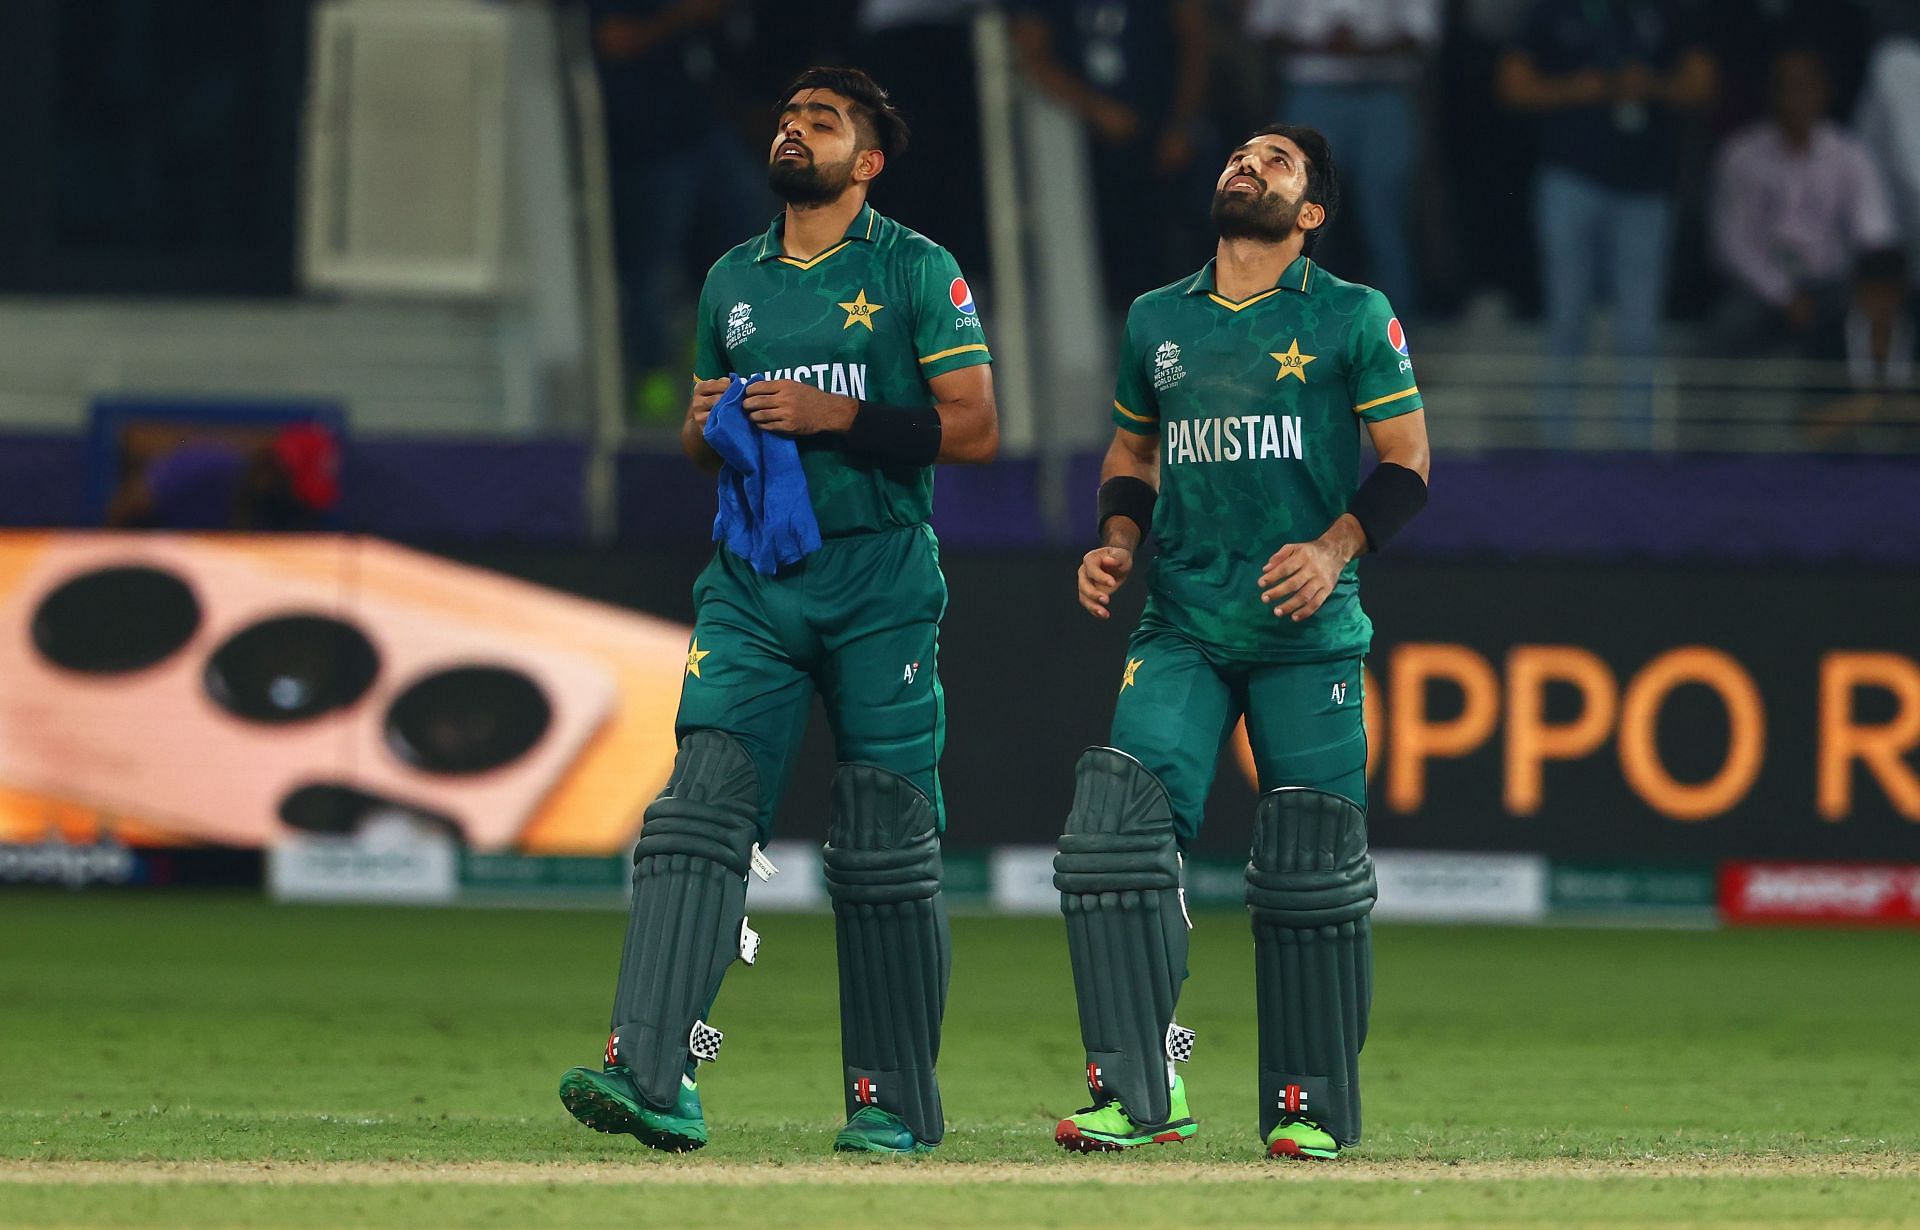 Aakash Chopra highlighted that Babar Azam and Mohammad Rizwan deserve all the plaudits